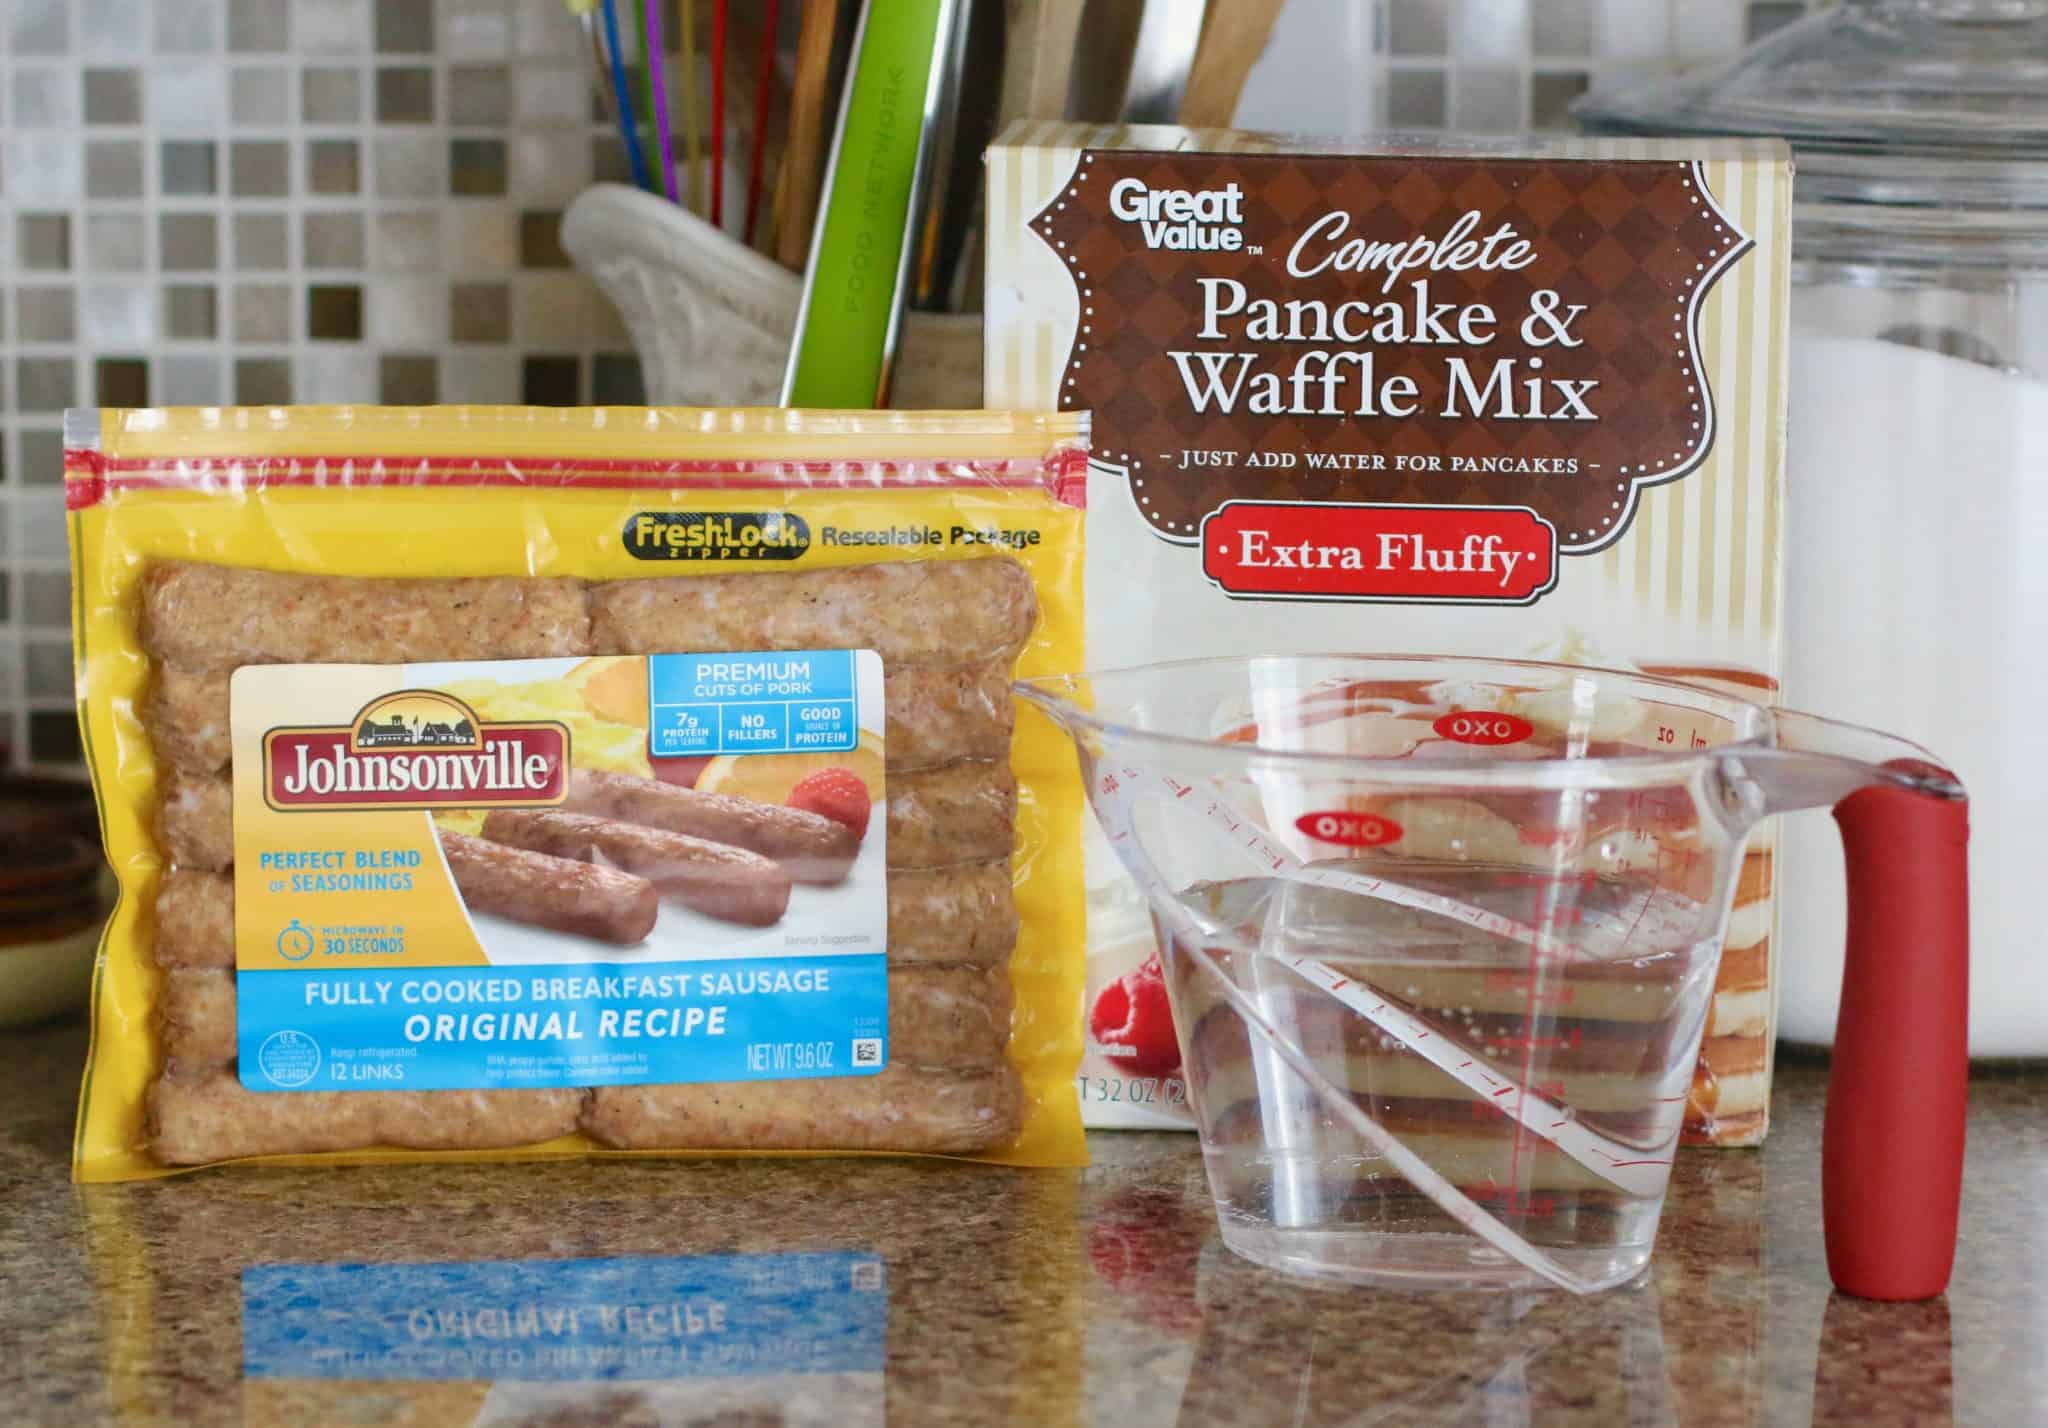 ingredients needed to make pancake sausage muffins: pancake mix, cooked sausages, water and maple extract.